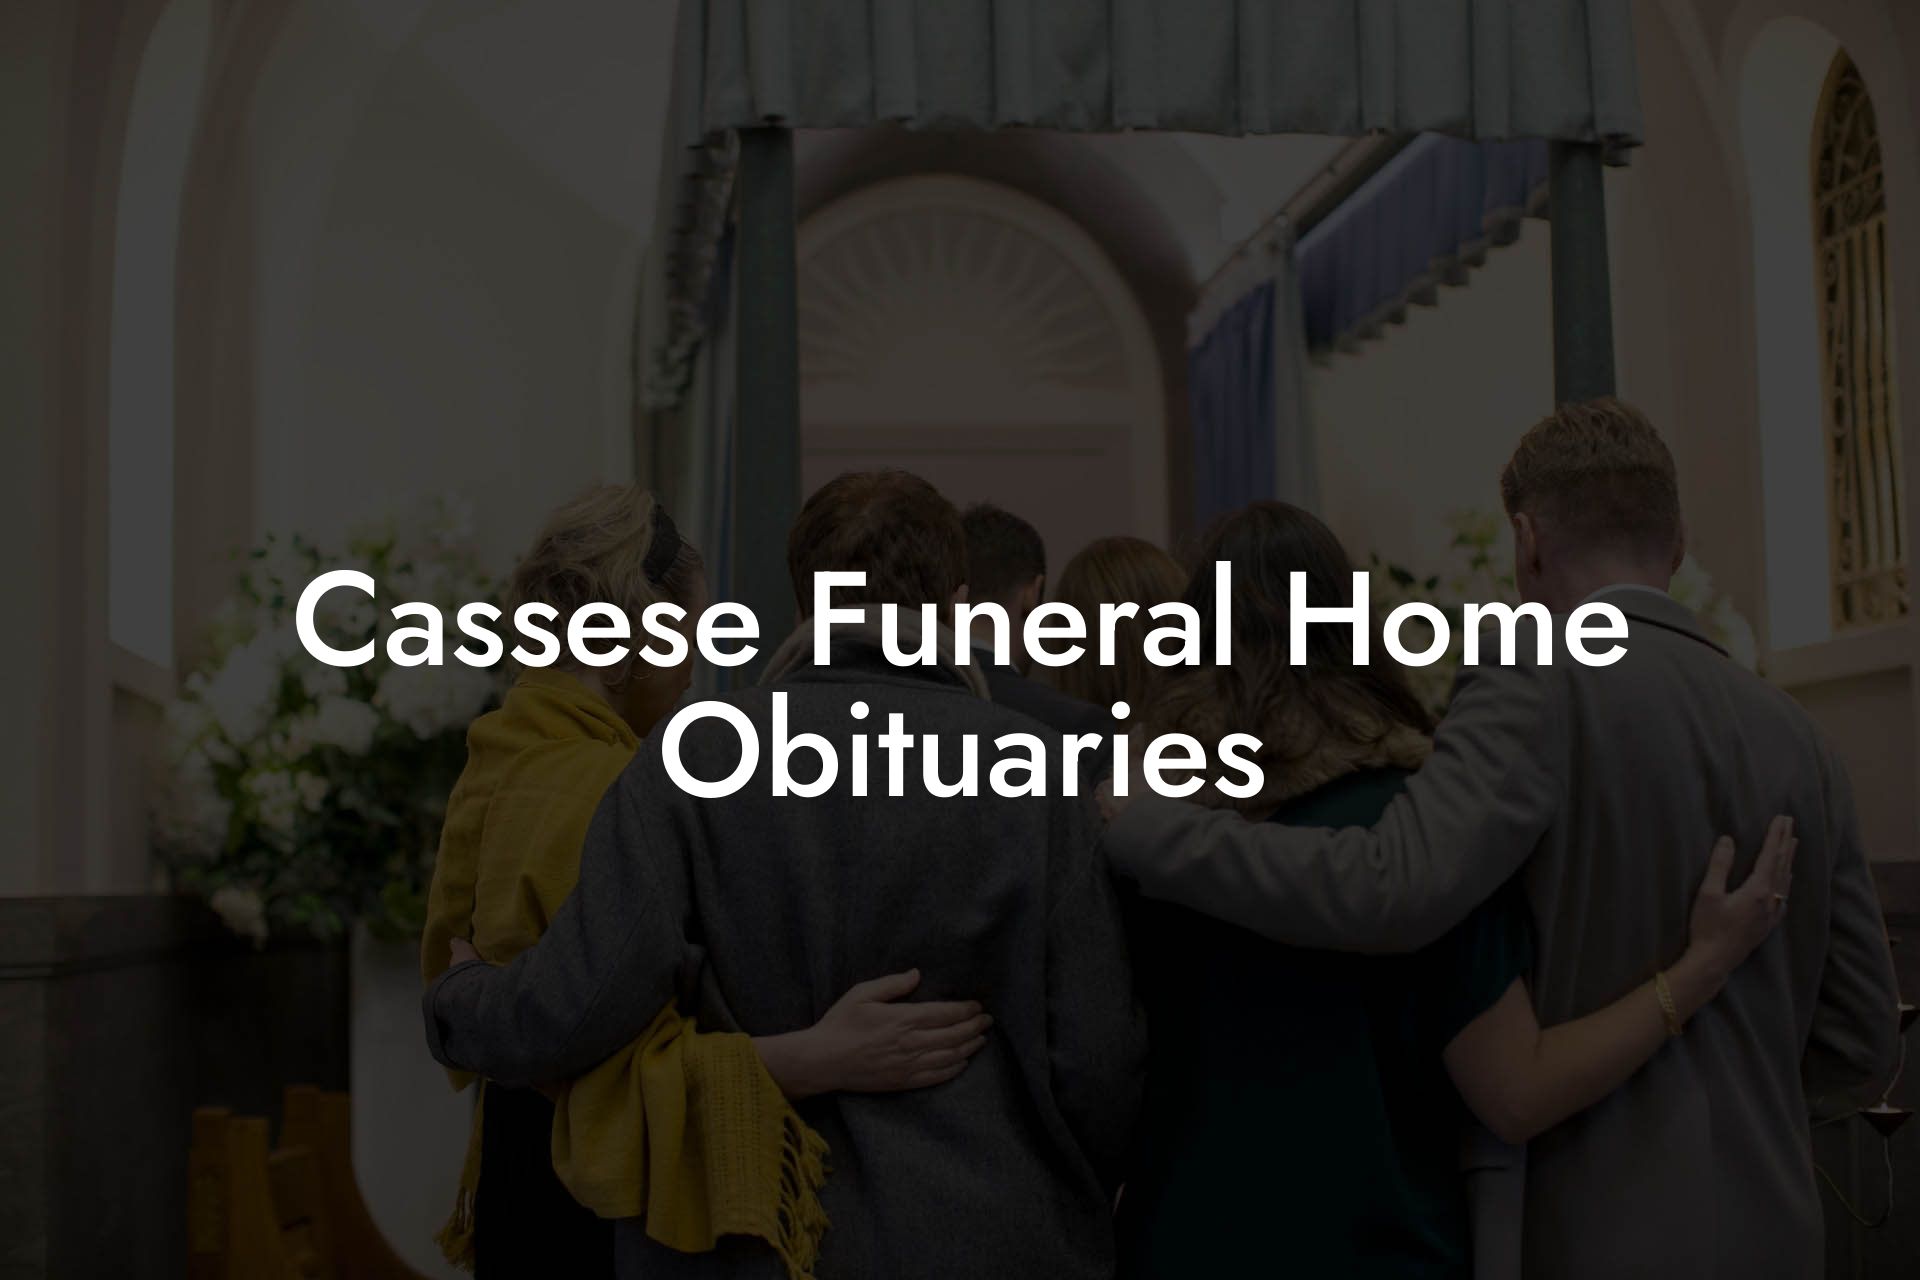 Cassese Funeral Home Obituaries